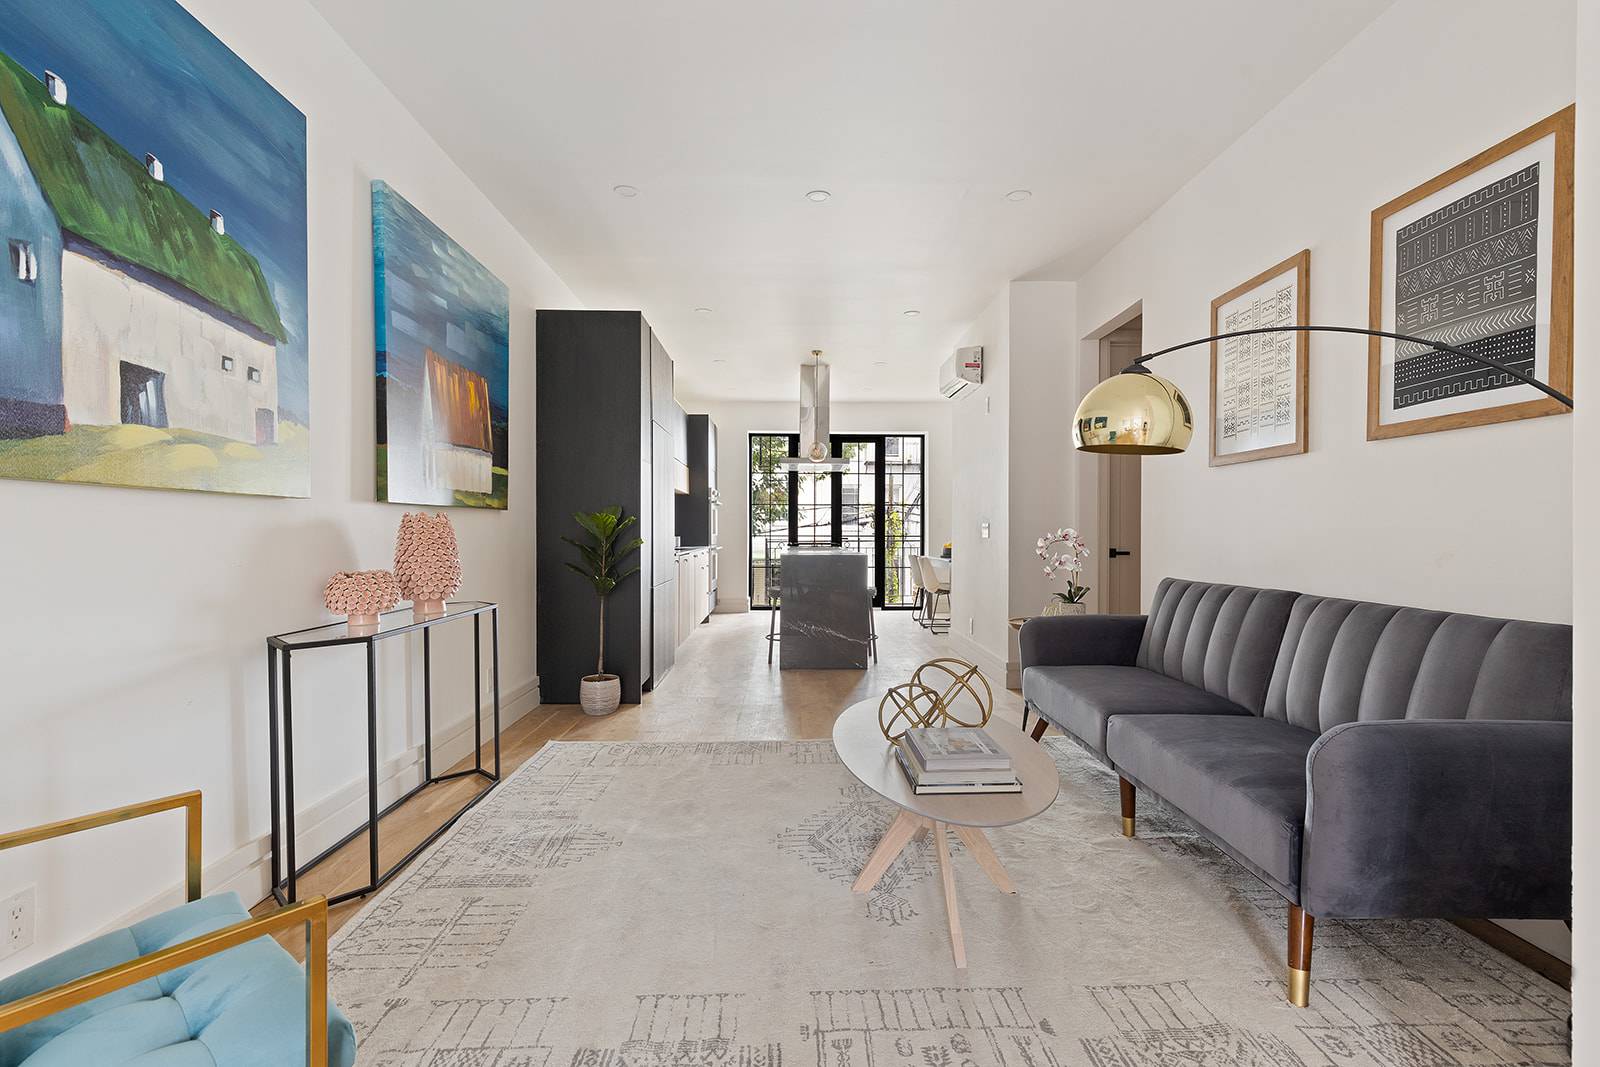 Located in the heart of Bedford Stuyvesant, this beautifully renovated three family townhouse delivers glamorous interiors, private outdoor space and a fantastic layout for end users and investors alike, including ...